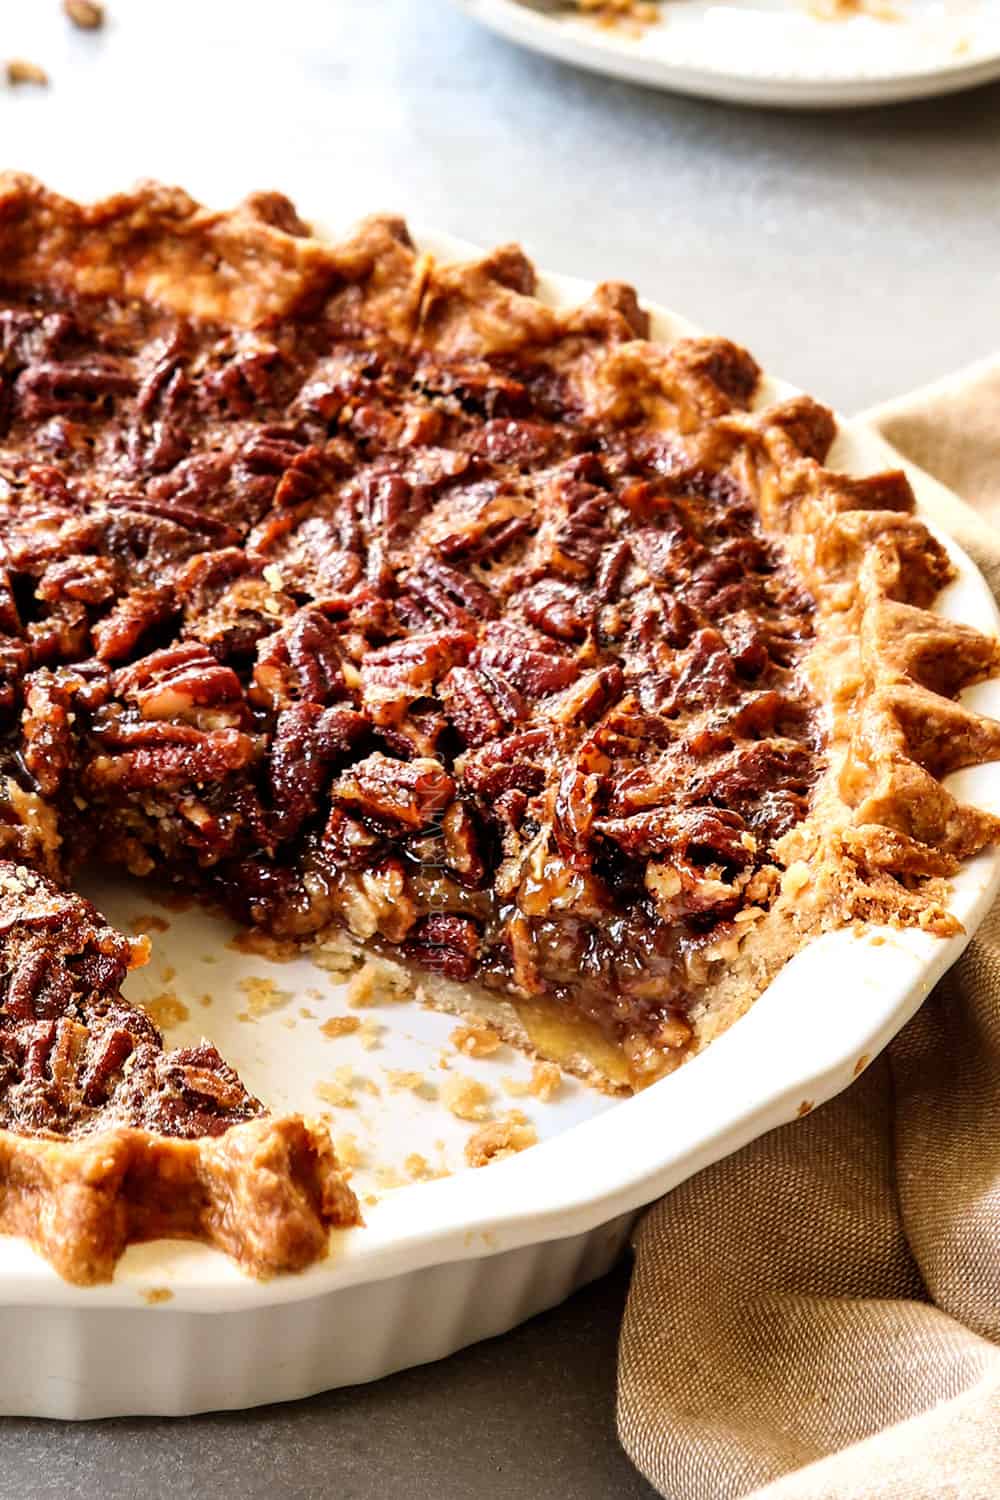 up close side view of pecan pie recipe in the pie plate with a piece missing showing the texture if the filling